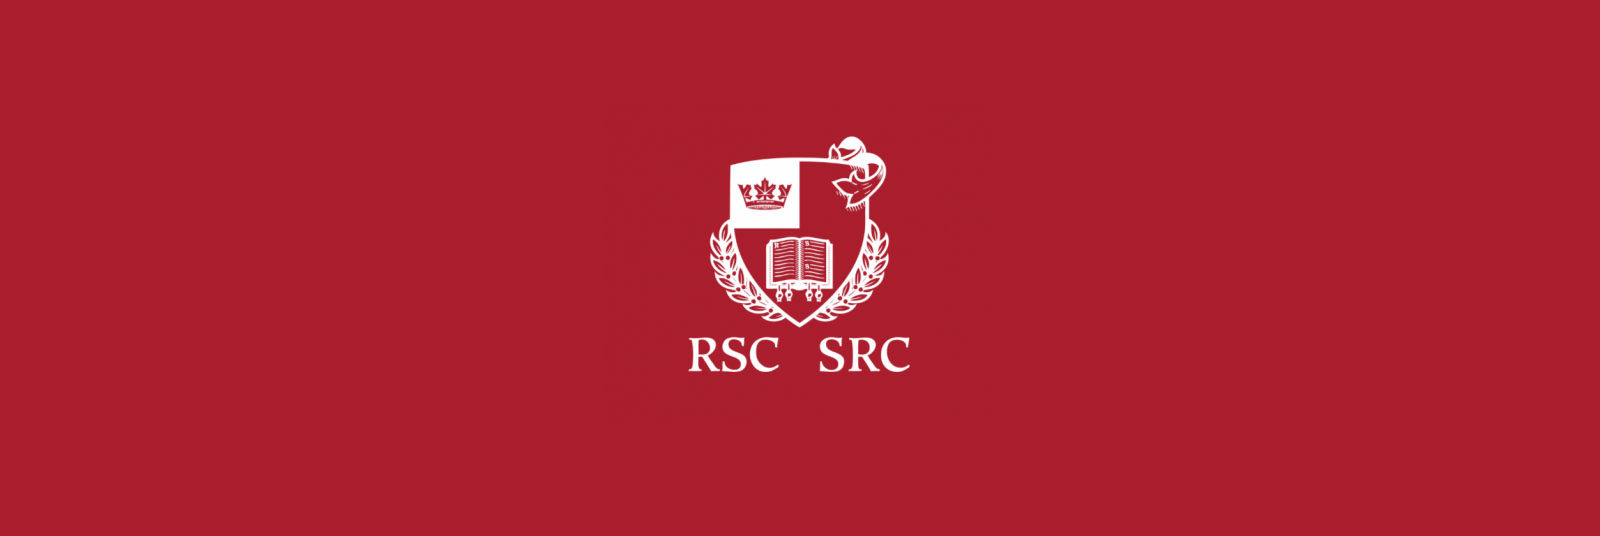 Royal Society of Canada FEATURED image for YFile